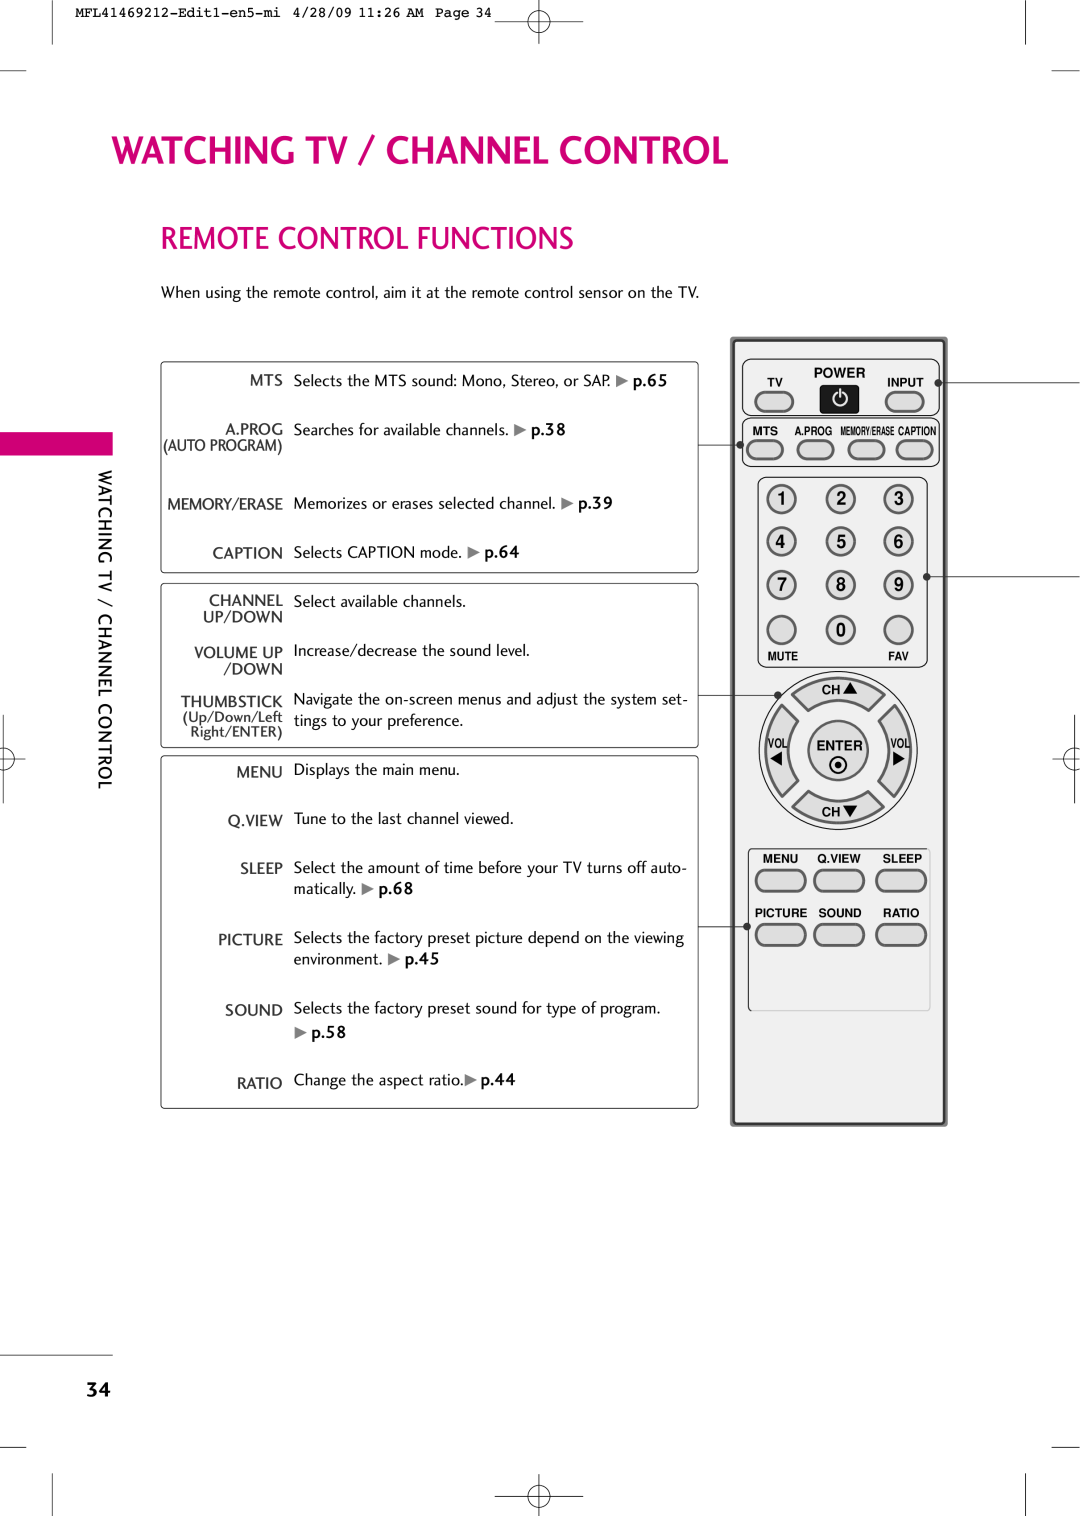 LG Electronics 2230R-MA manual Watching Tv / Channel Control, Remote Control Functions, 1 2 4 5 7 8, Up/Down 